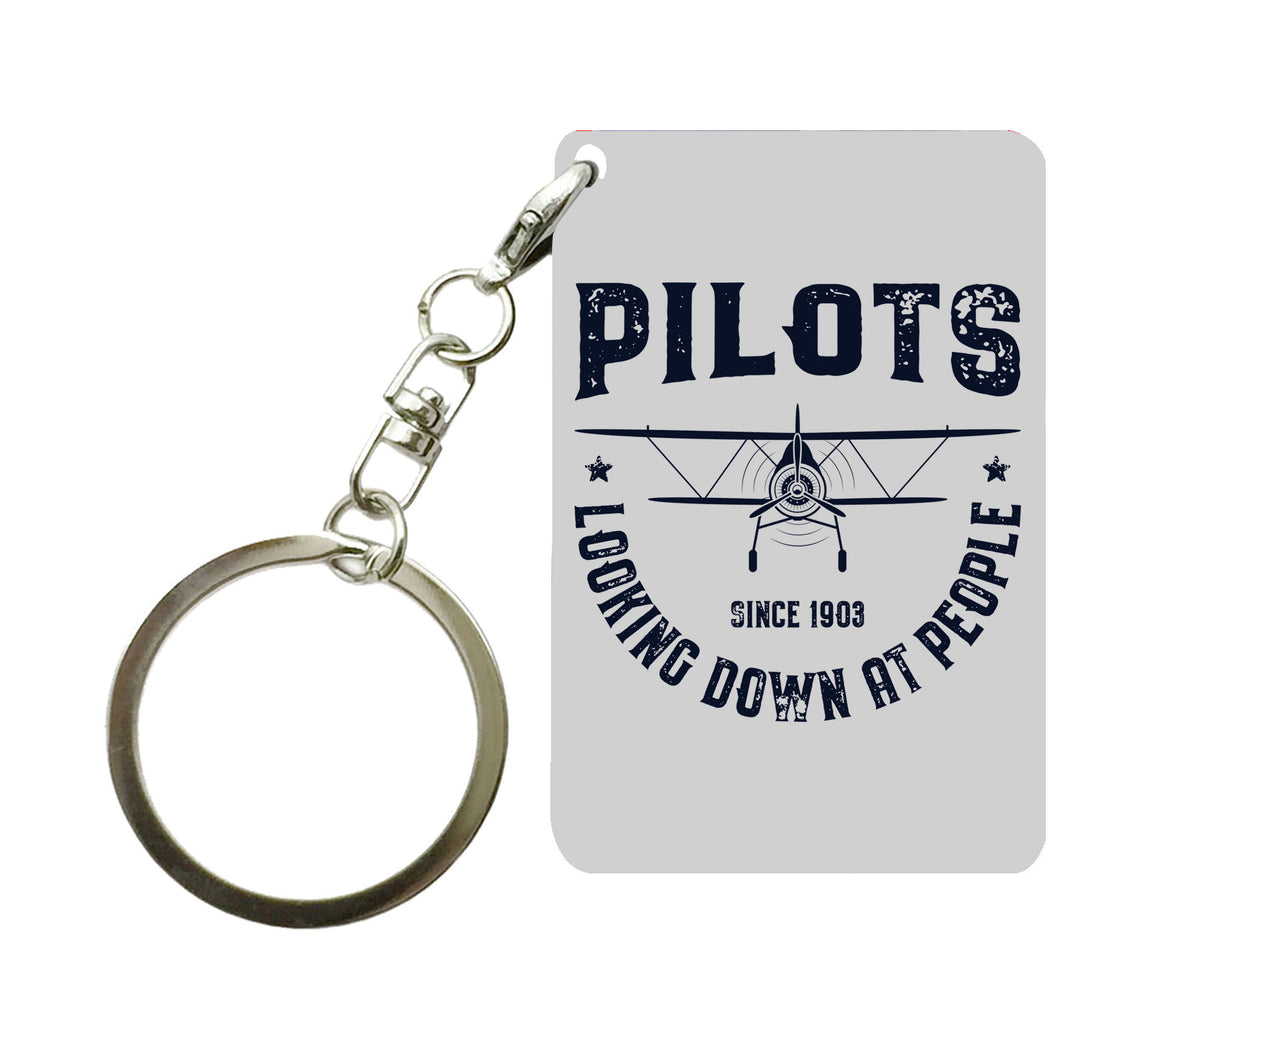 Pilots Looking Down at People Since 1903 Designed Key Chains